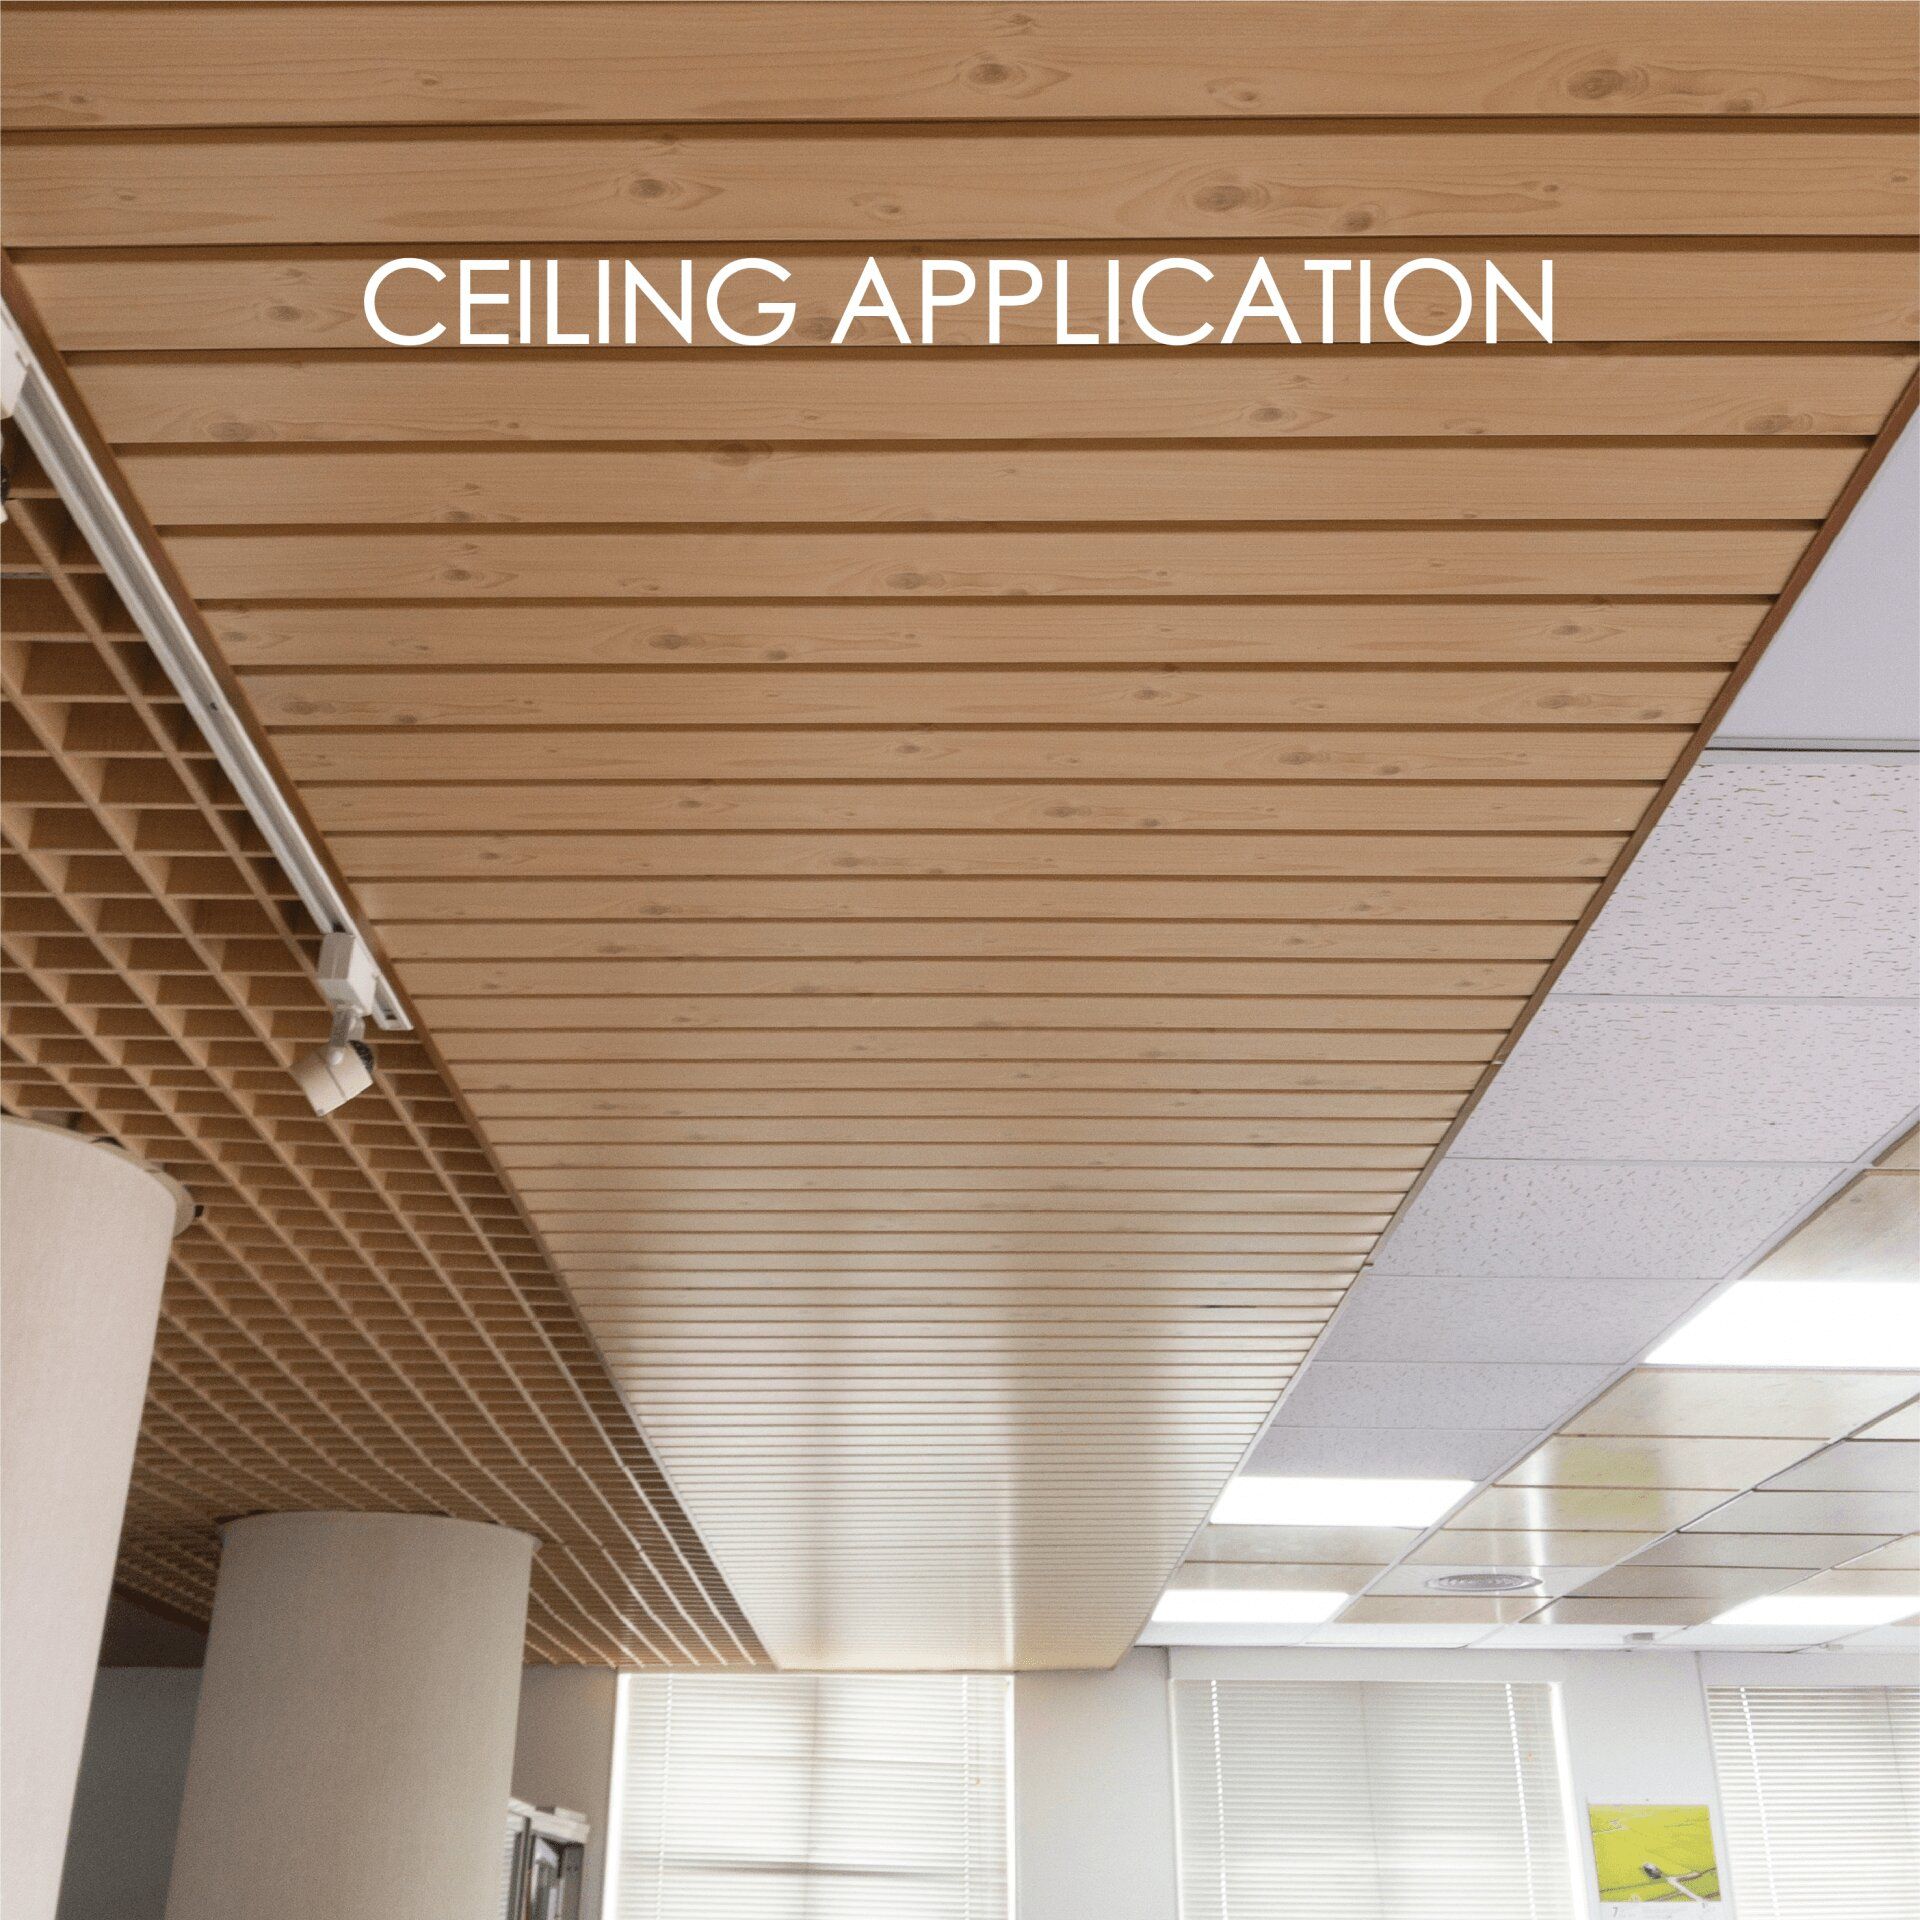 Using laminated metal to make ceilings adds decorative and durability